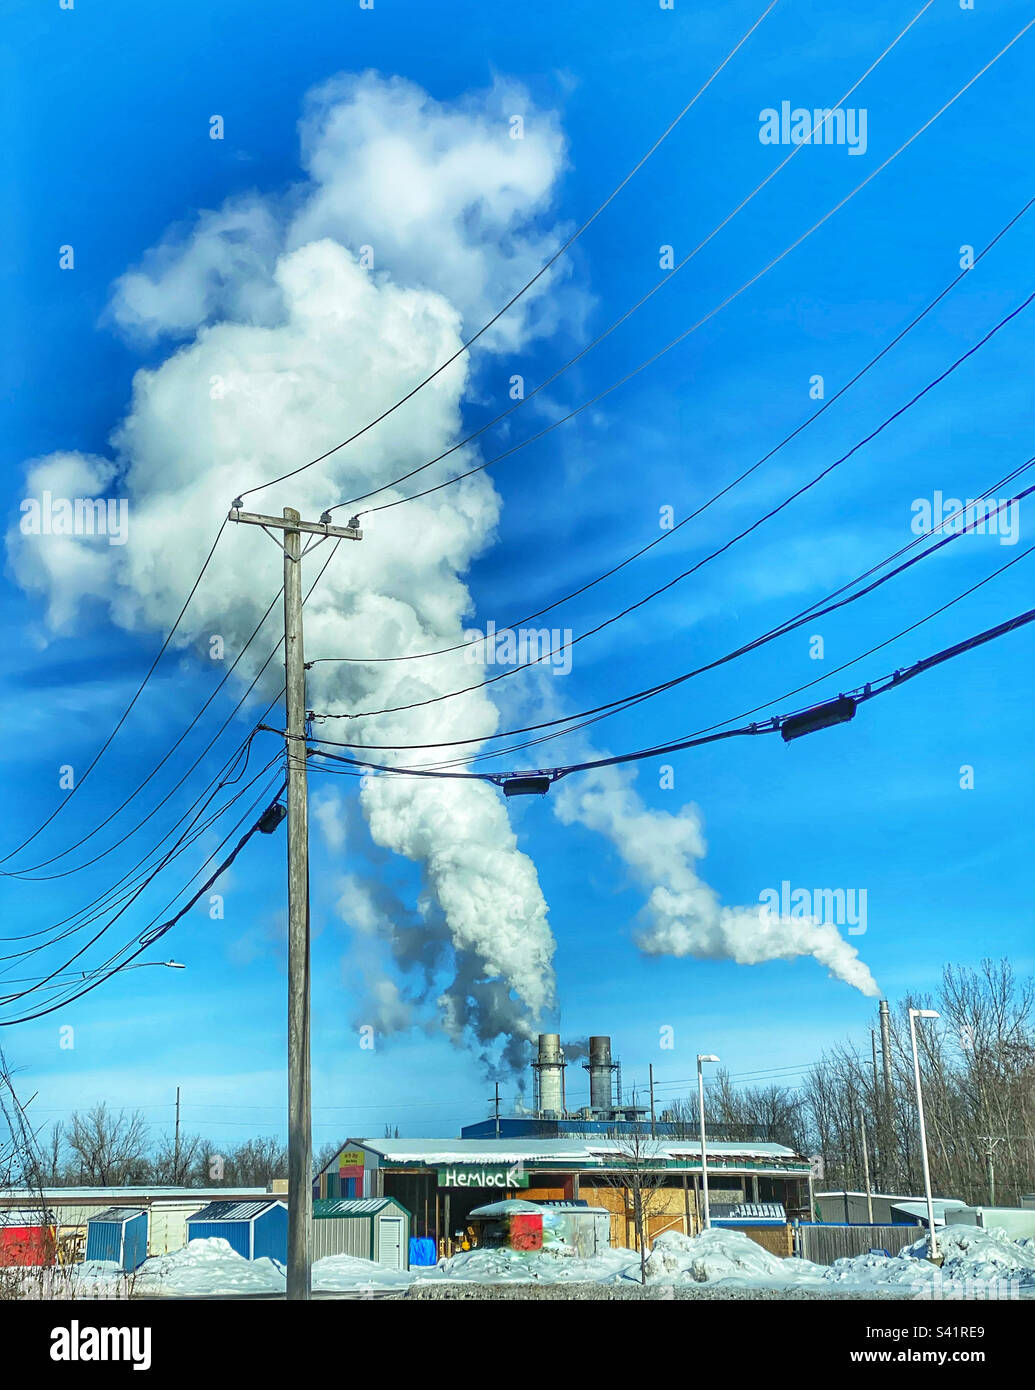 Hemlock sign on a building in front of a power plant with smoke rising from smokestacks Stock Photo